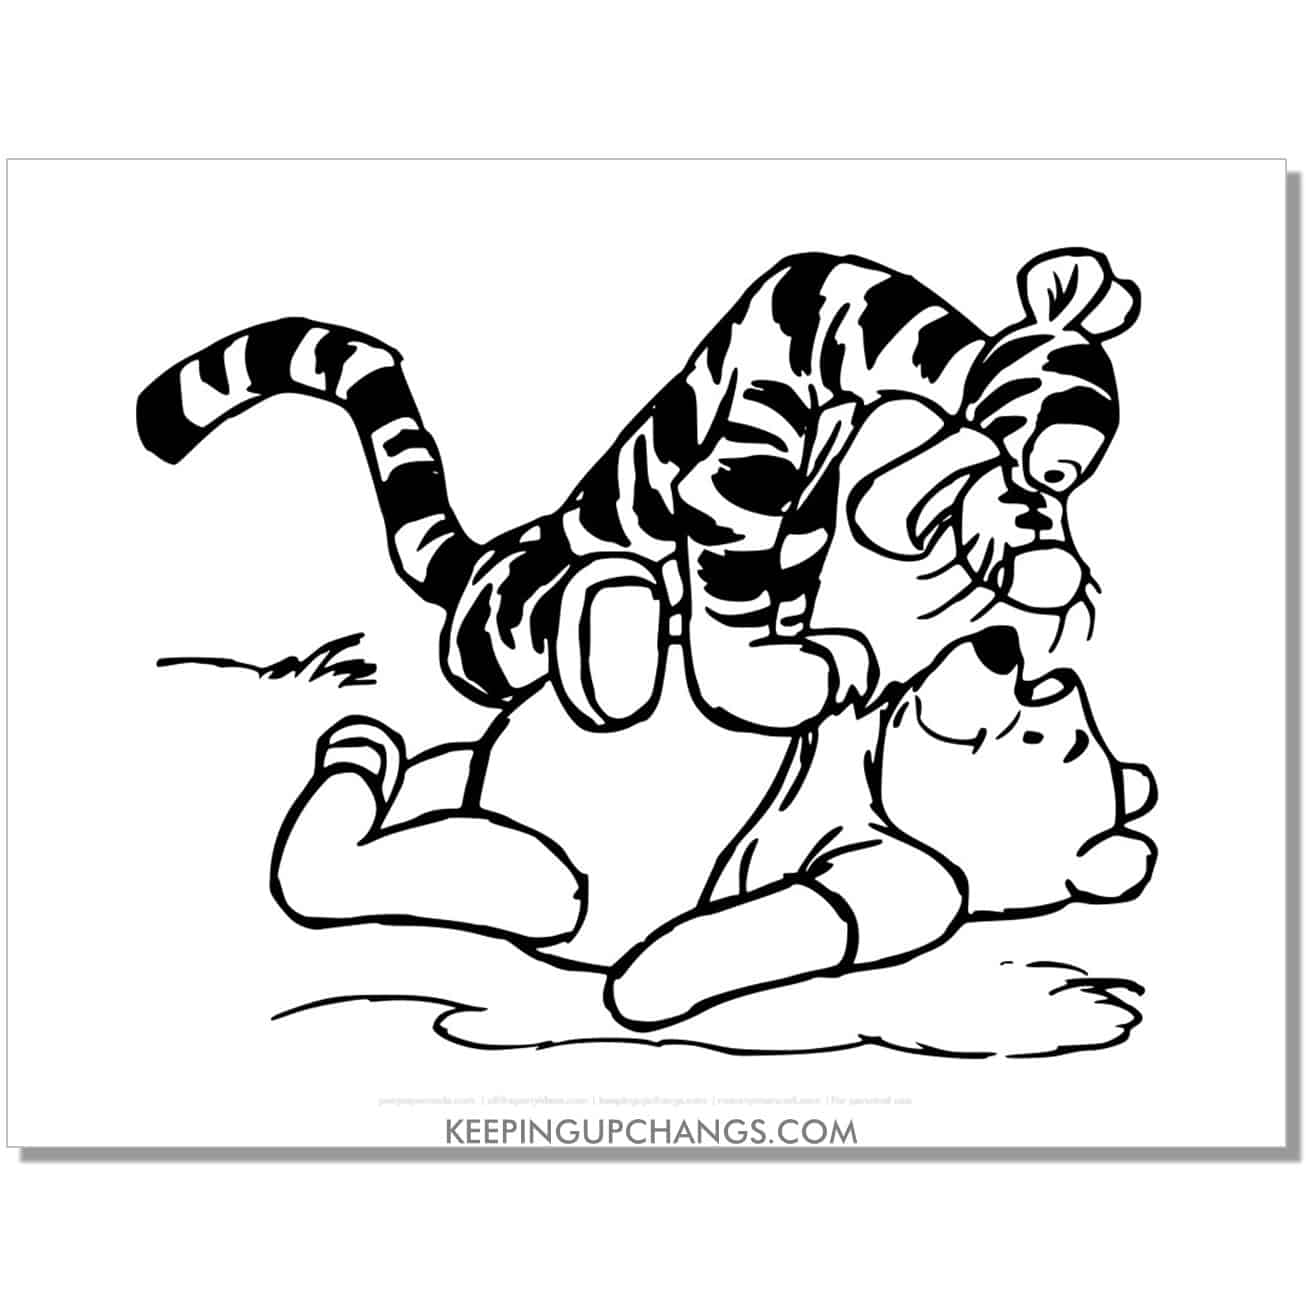 tigger pounced on winnie the pooh coloring page, sheet.